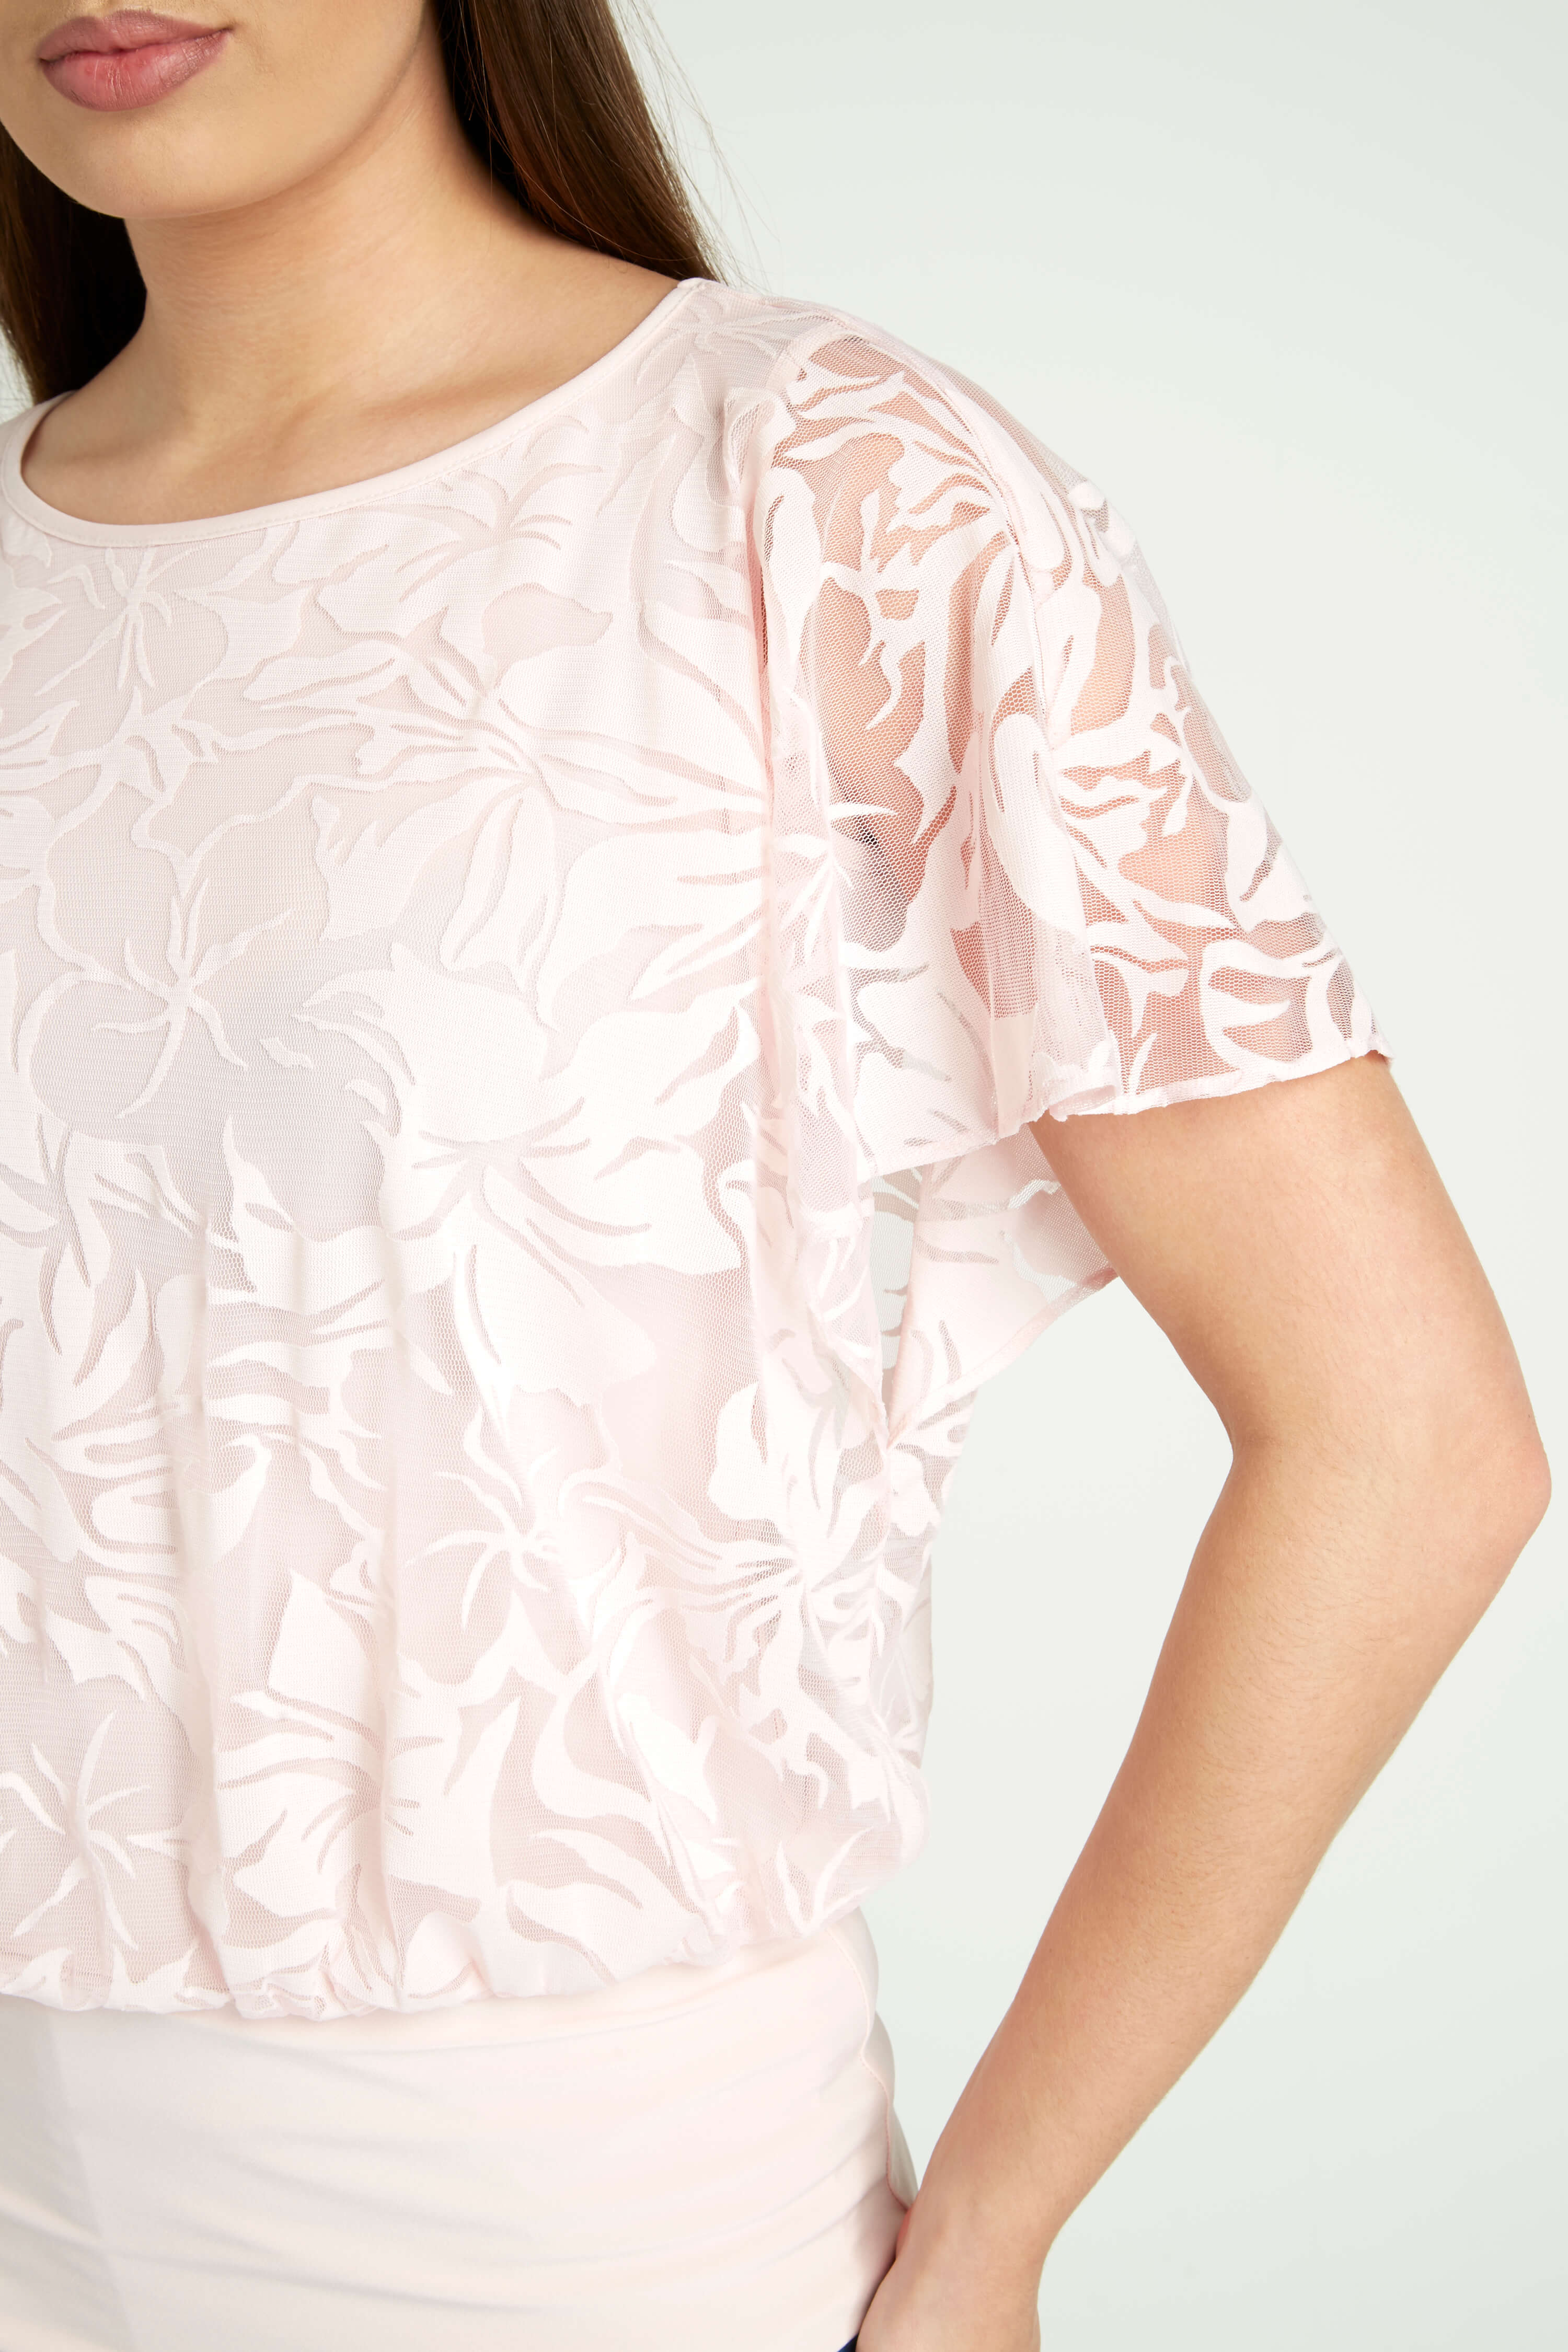 PINK Floral Double Layer Burnout Print Top, Image 3 of 5